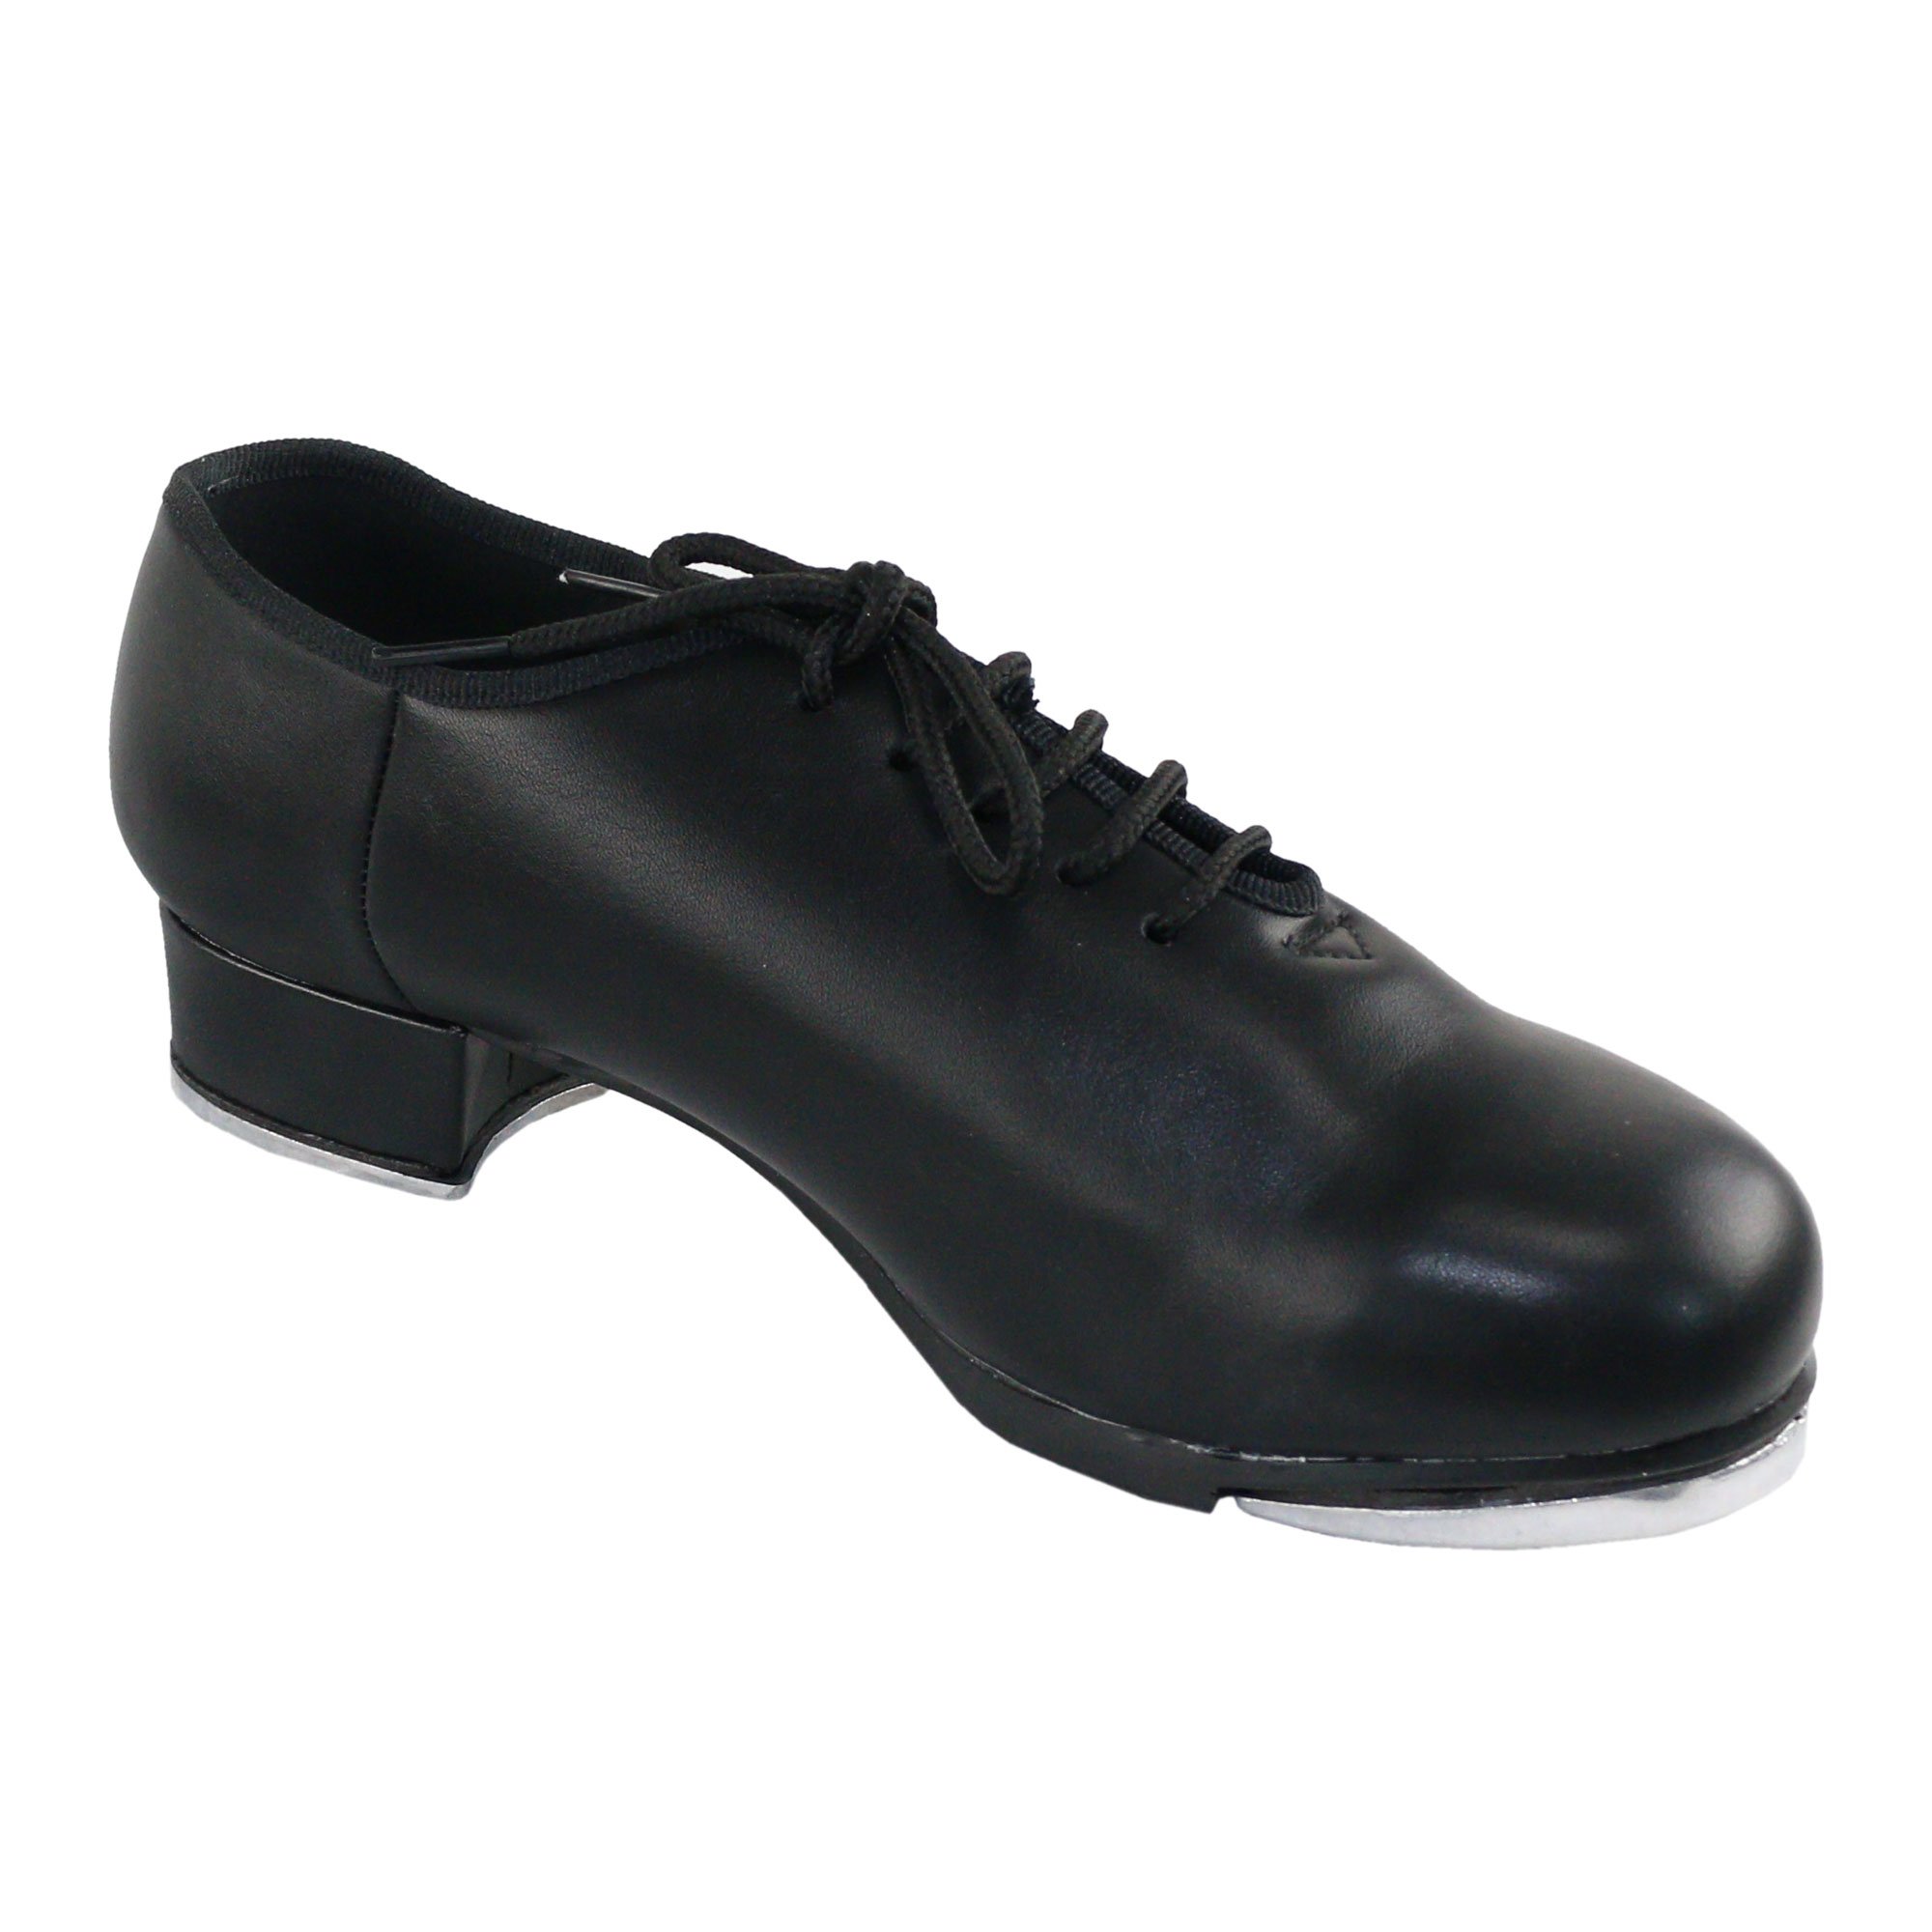 Danzcue Adult Lace Up Tap Shoes